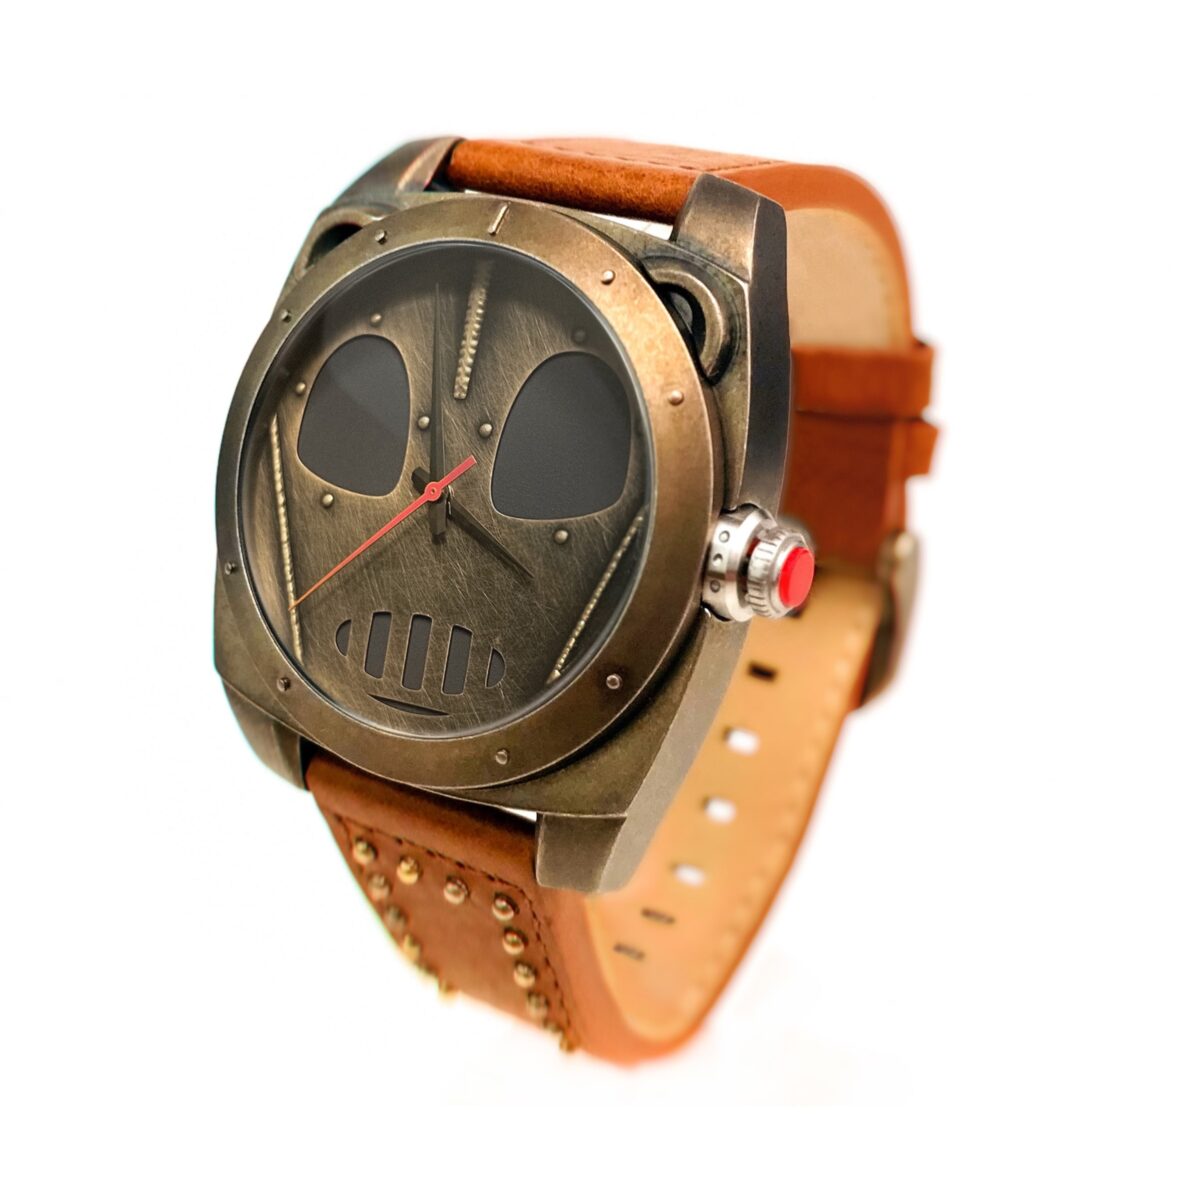 WatchHeroPhotoCutout 1 fce31fcc feda 10 Unusual Watches for Men Under $500